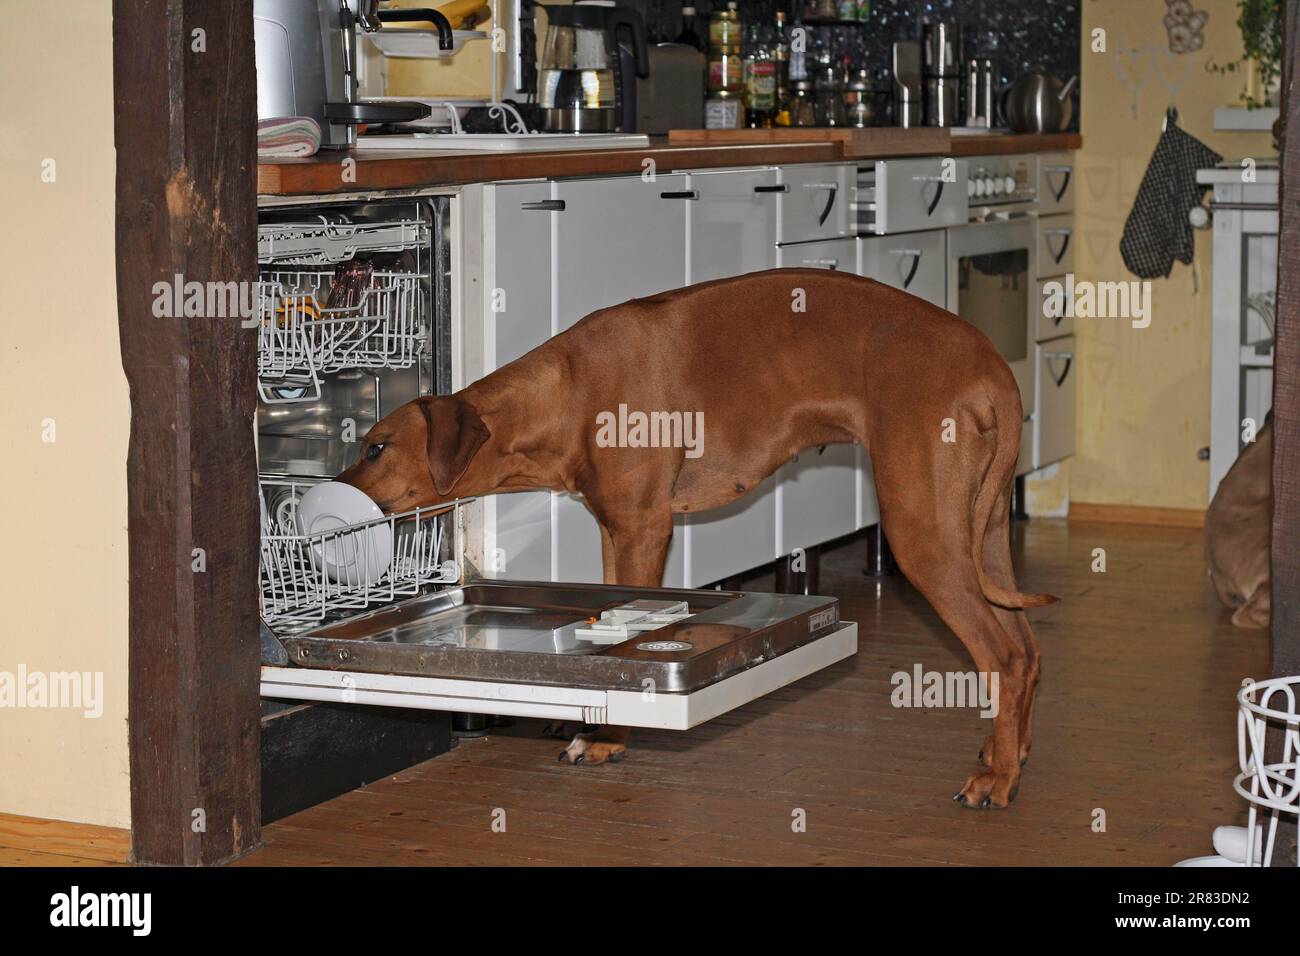 Rhodesian gray wolf (Canis lupus) f. familiaris, standing in the kitchen in front of the open dishwasher, sticking his head in and licking a plate Stock Photo